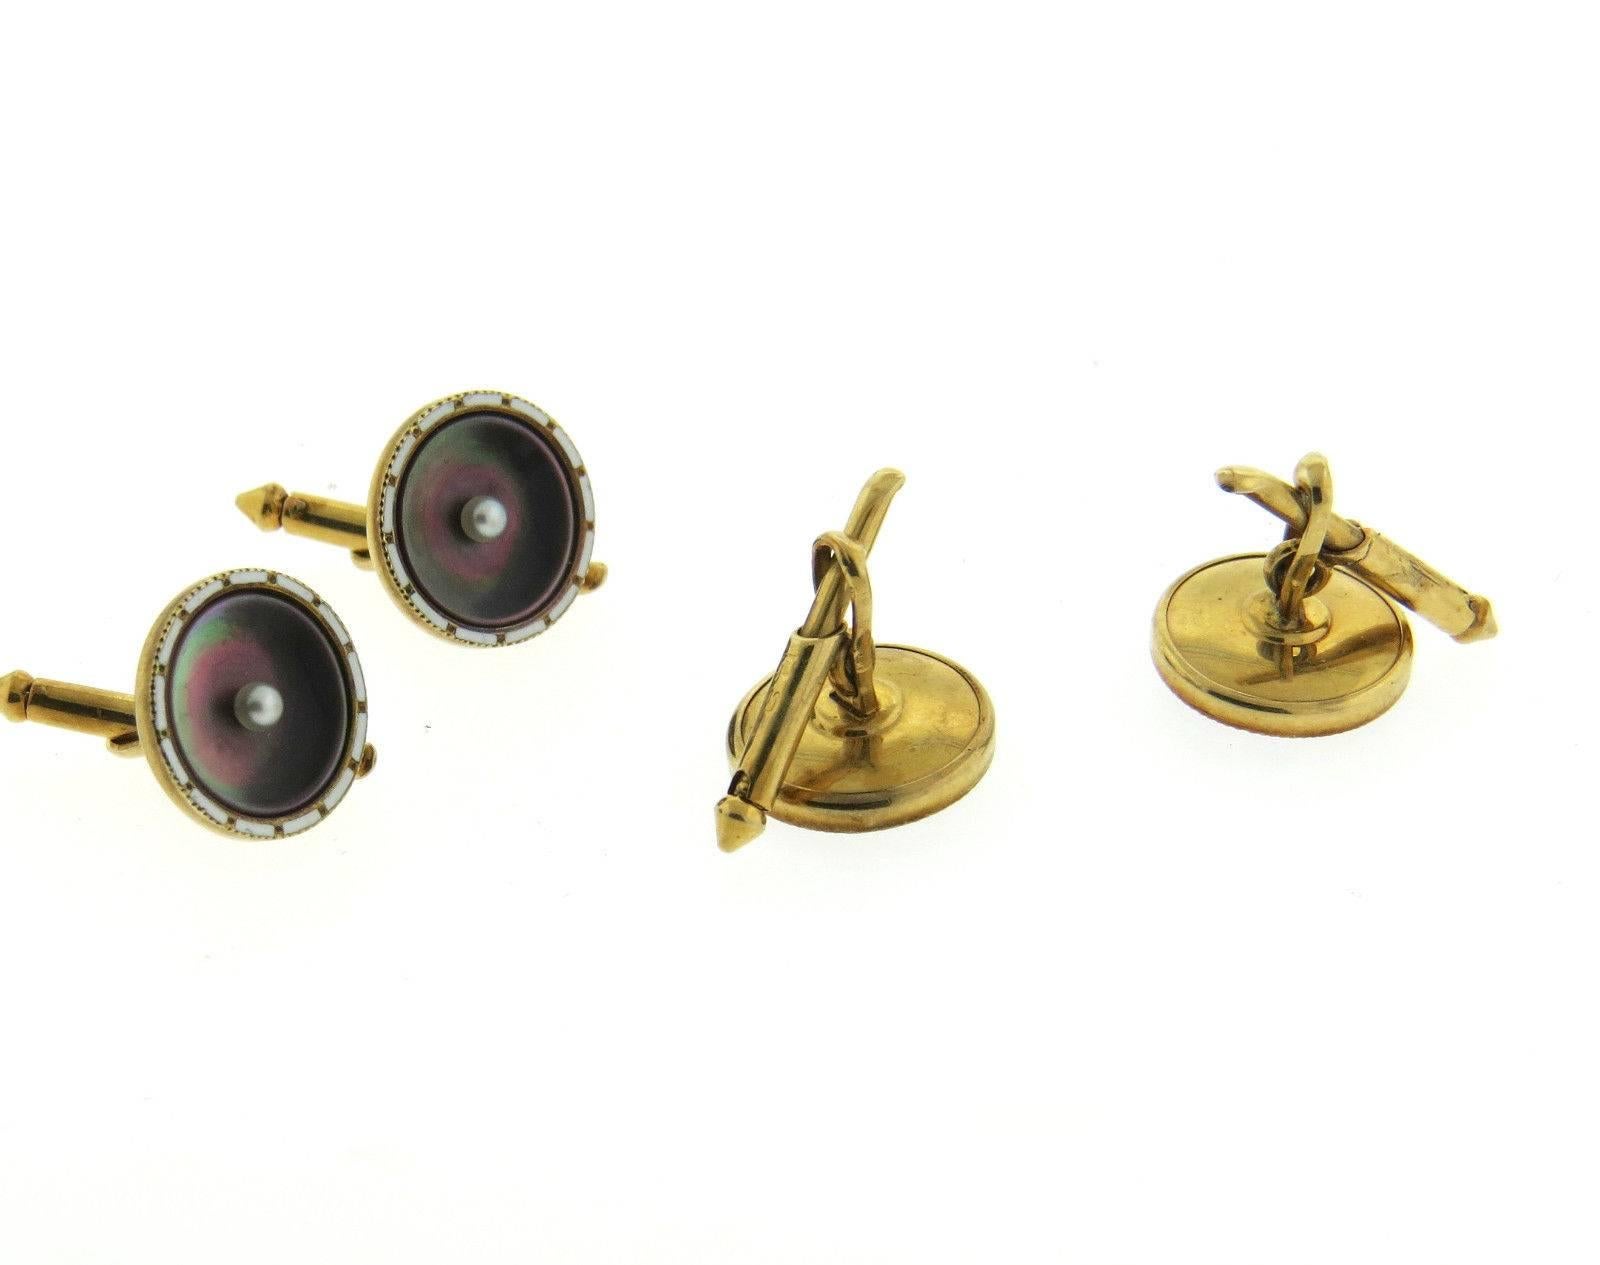 A 14k yellow gold stud set adorned with mother of pearl tops with seed pearls in the center. Each top measures 13mm in diameter and the cufflinks weigh 7.3 grams.  Marked: Maker's mark and 14k.